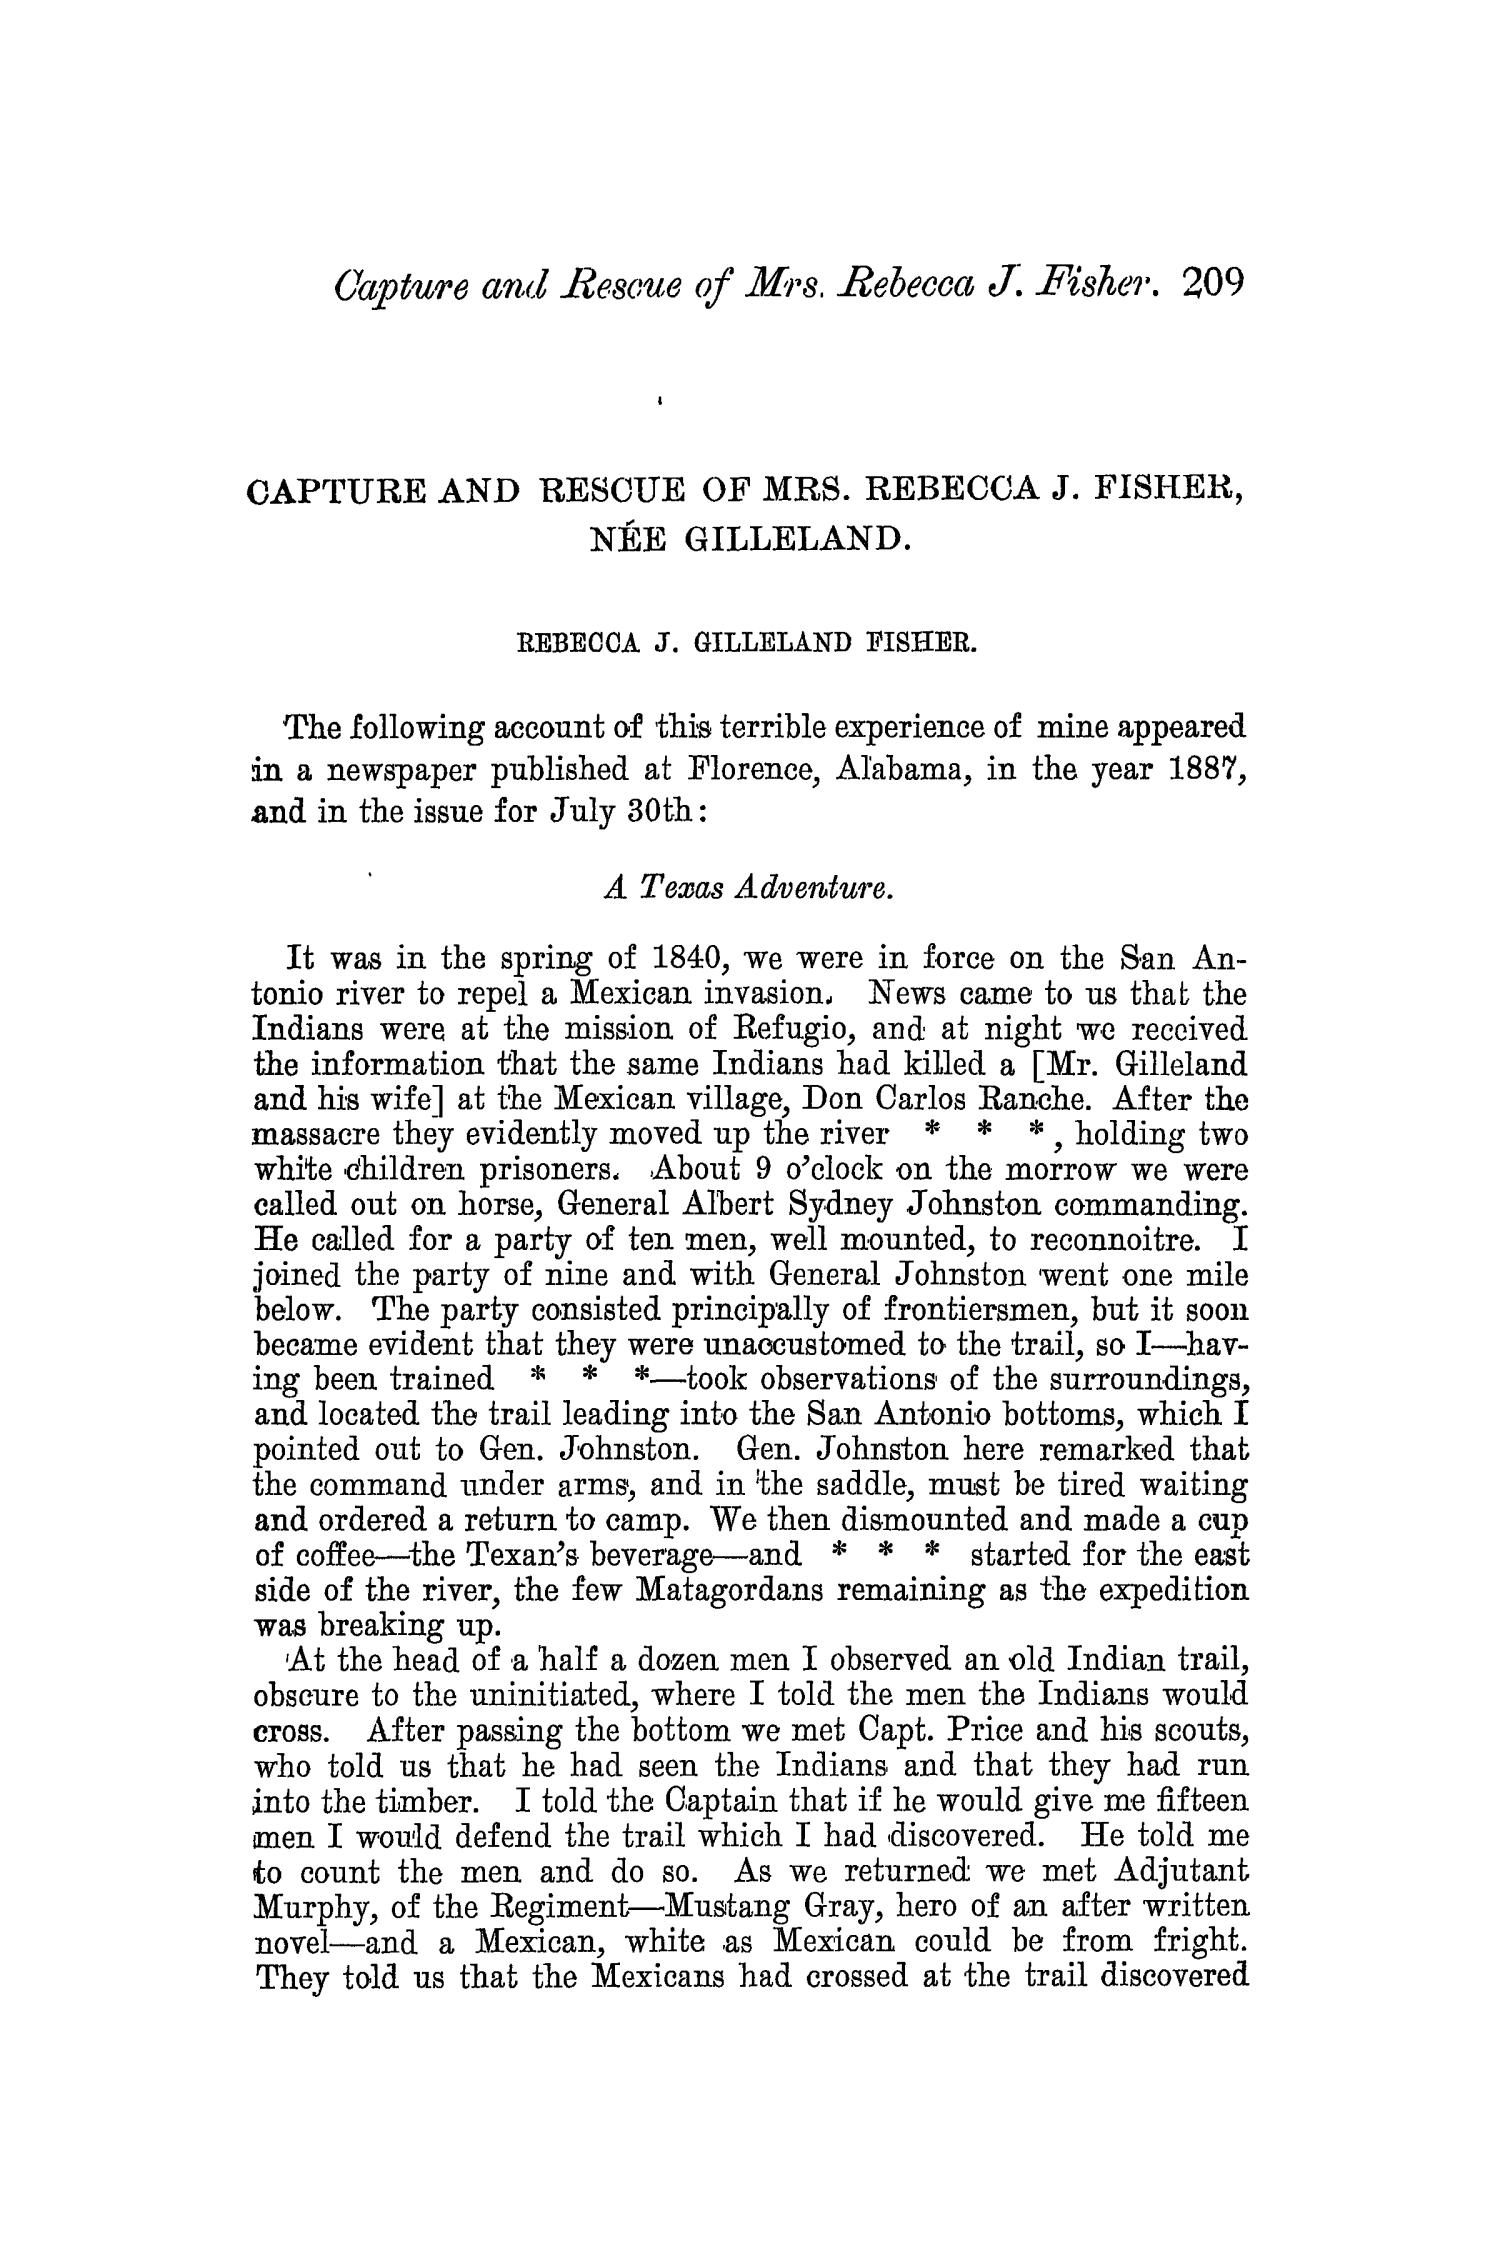 The Quarterly of the Texas State Historical Association, Volume 3, July 1899 - April, 1900
                                                
                                                    209
                                                